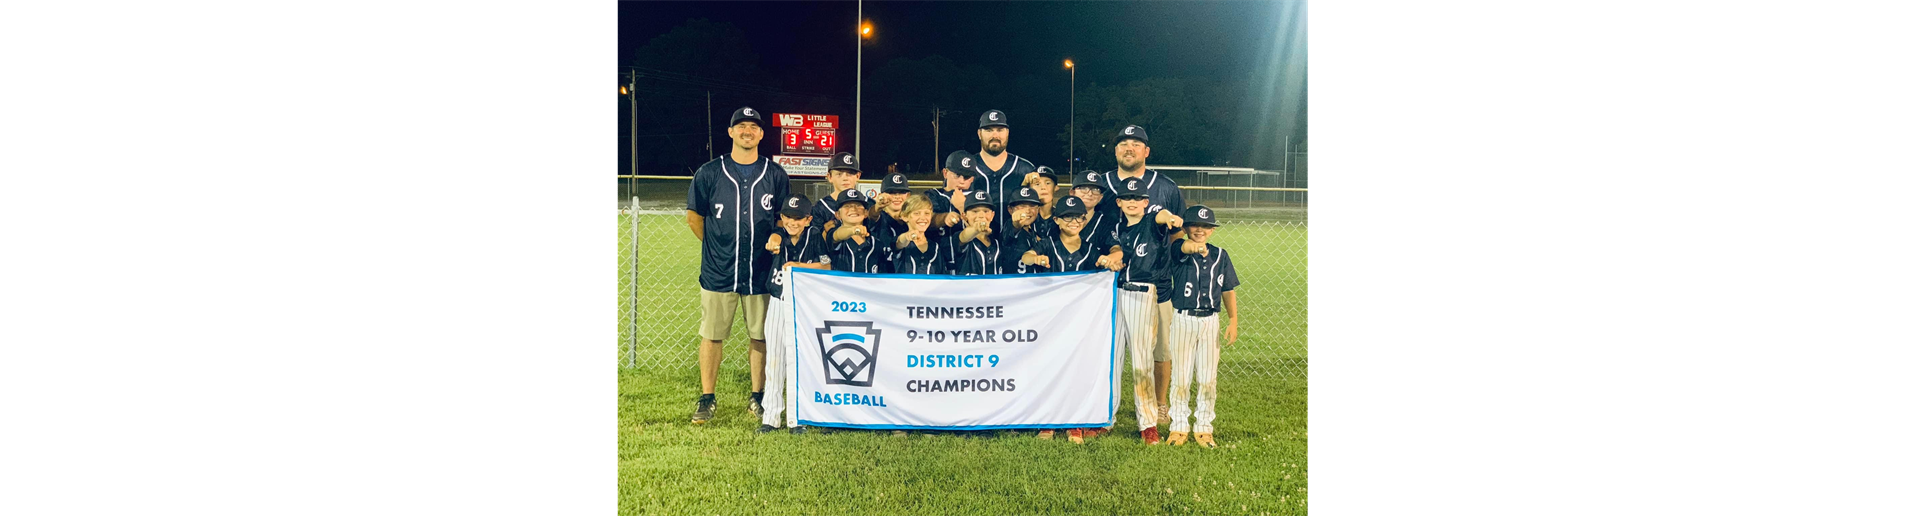 2023 District 9 9-10 Year Old Champs